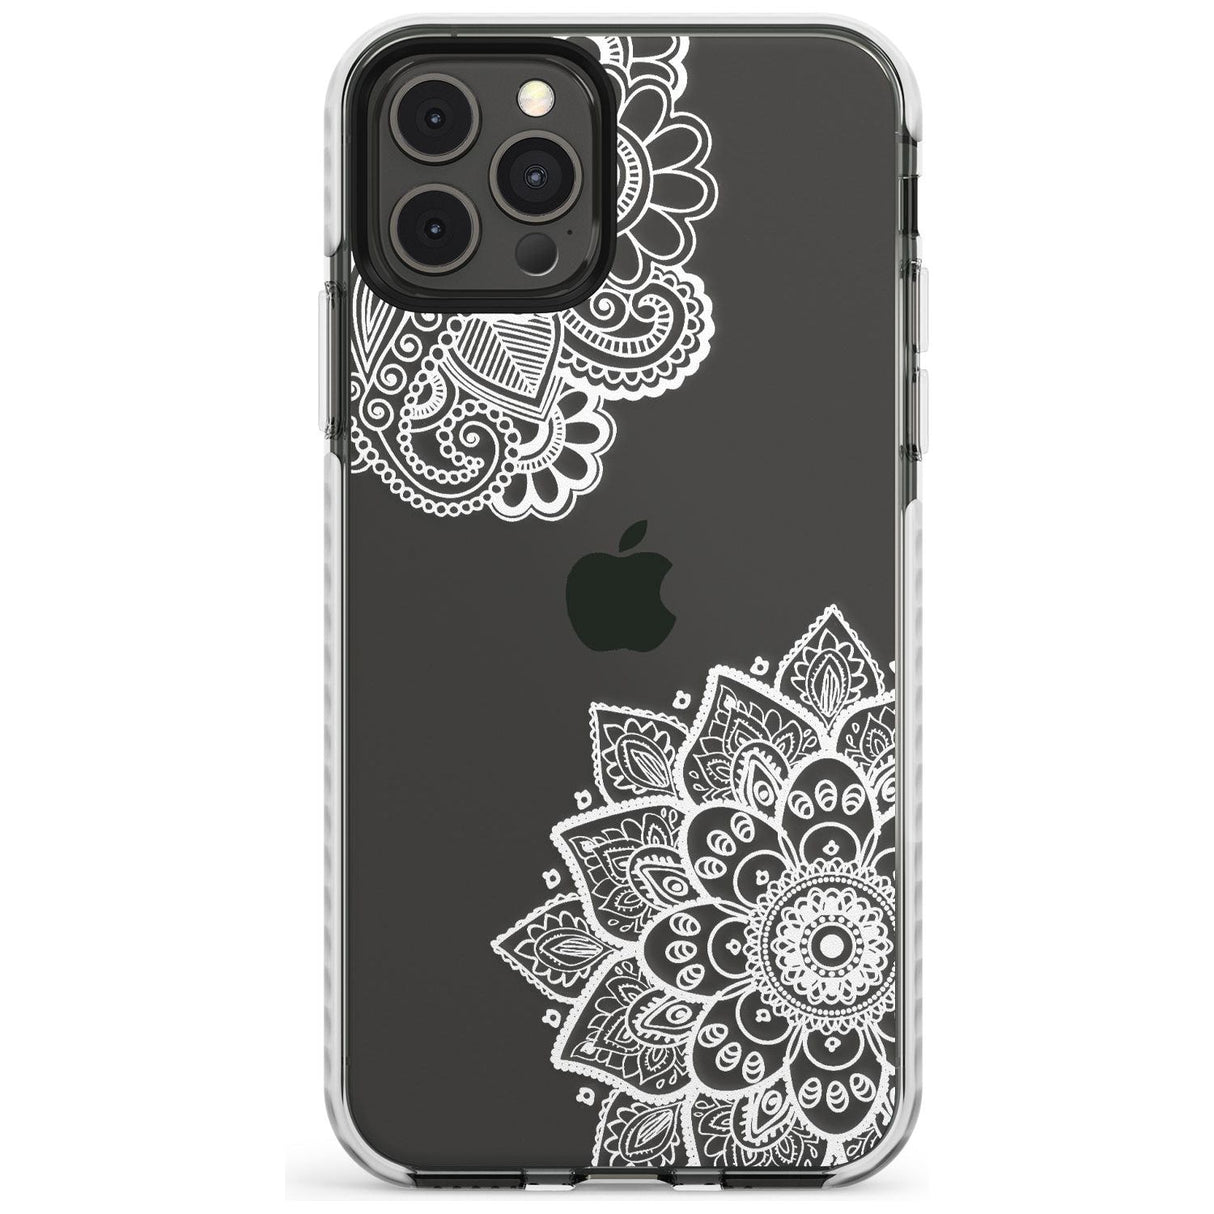 White Henna Florals Impact Phone Case for iPhone 11 Pro Max